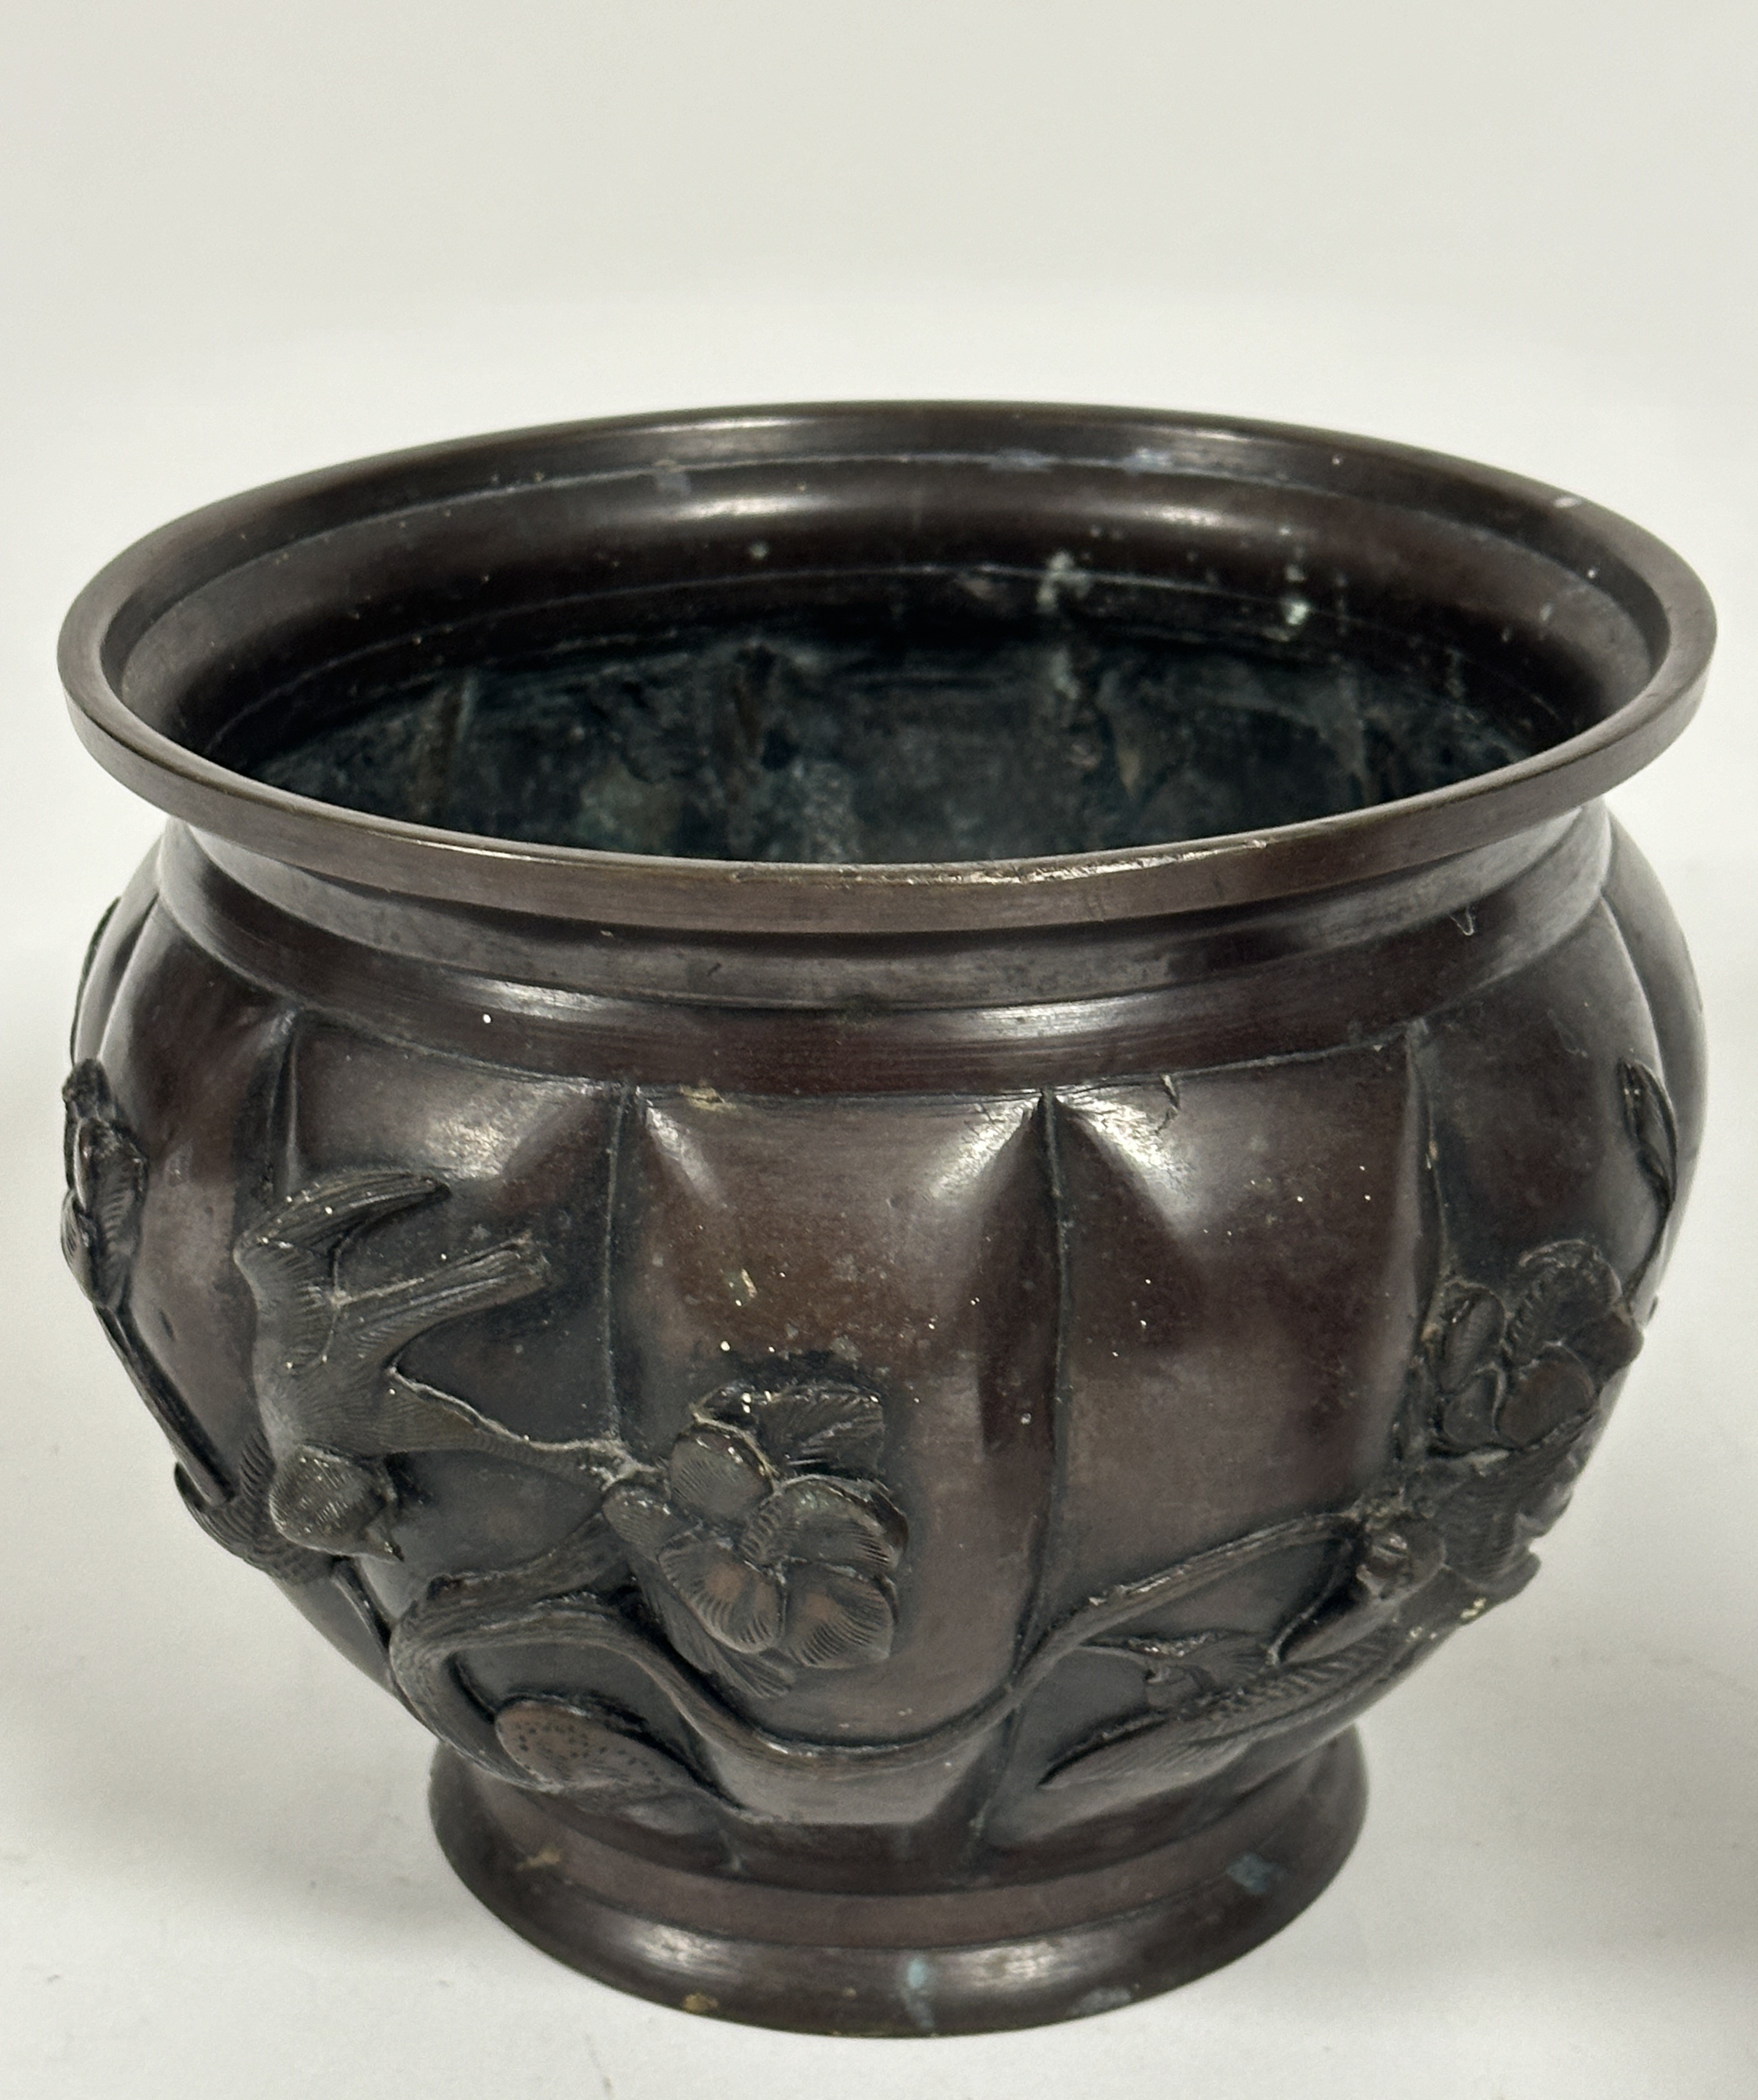 A Japanese patinated bronze jardiniere of paneled tapered design with cast bird and floral - Image 4 of 5